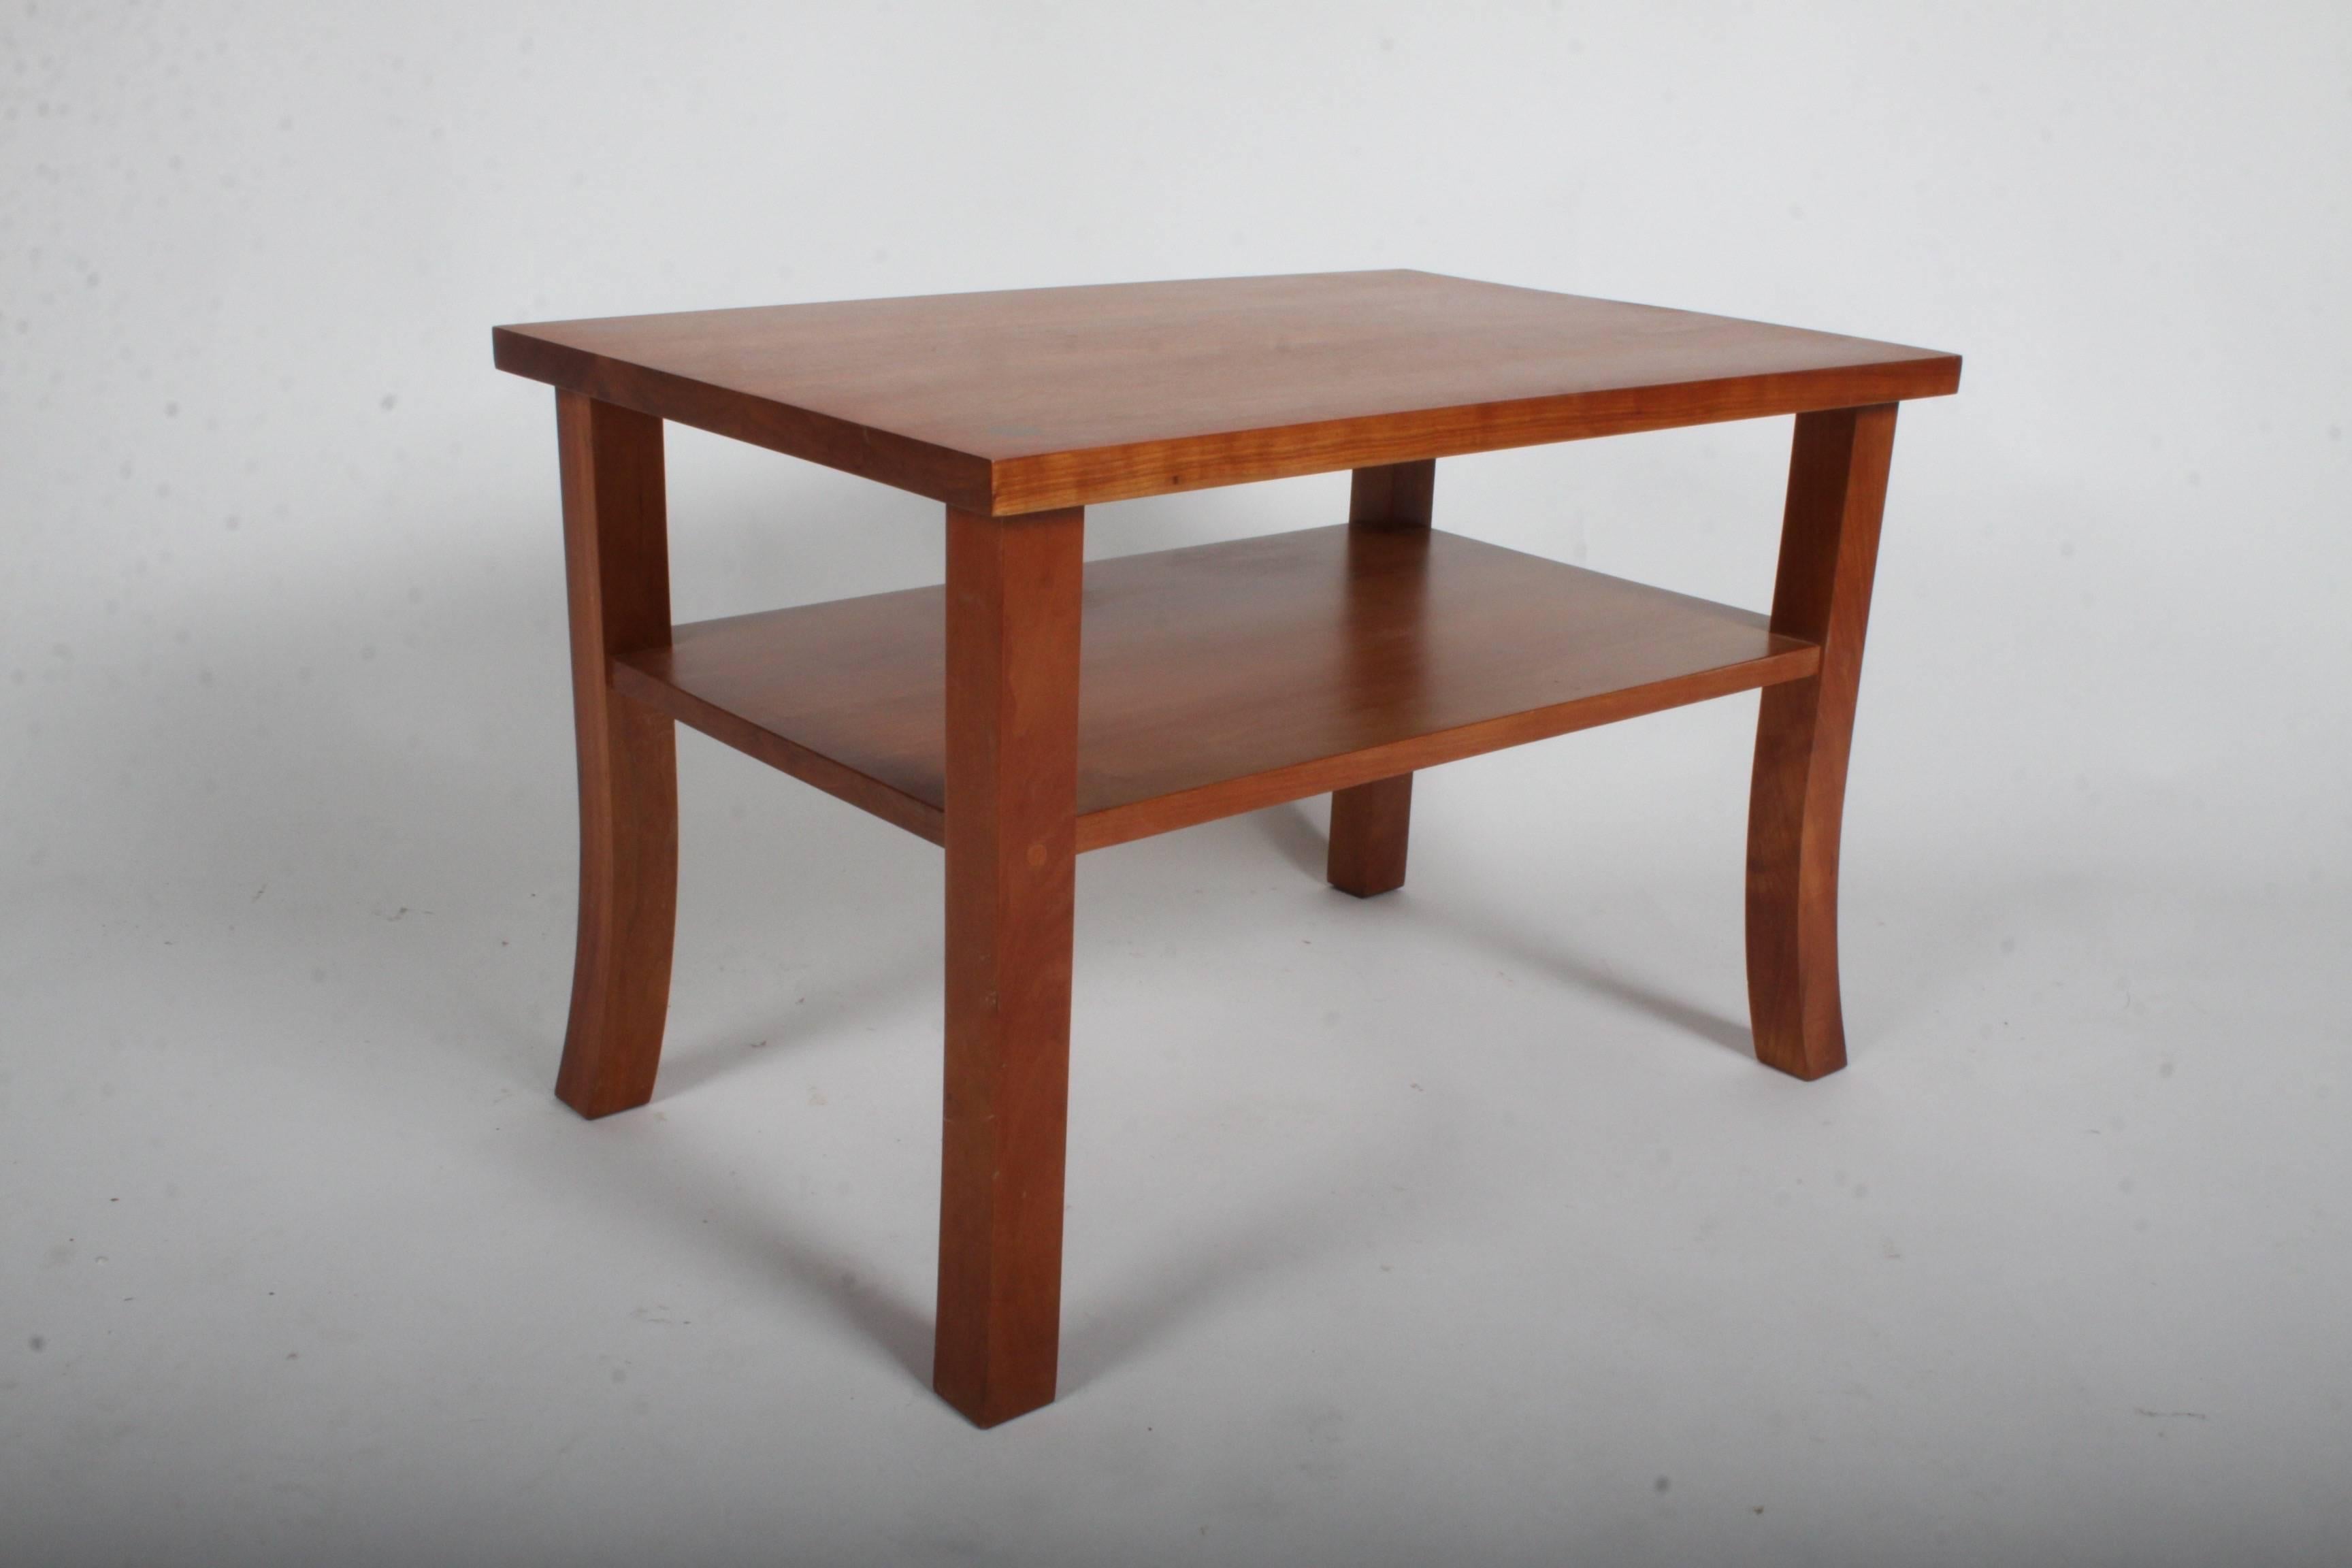 American Signed Thomas Moser Lolling Side Table in Cherry